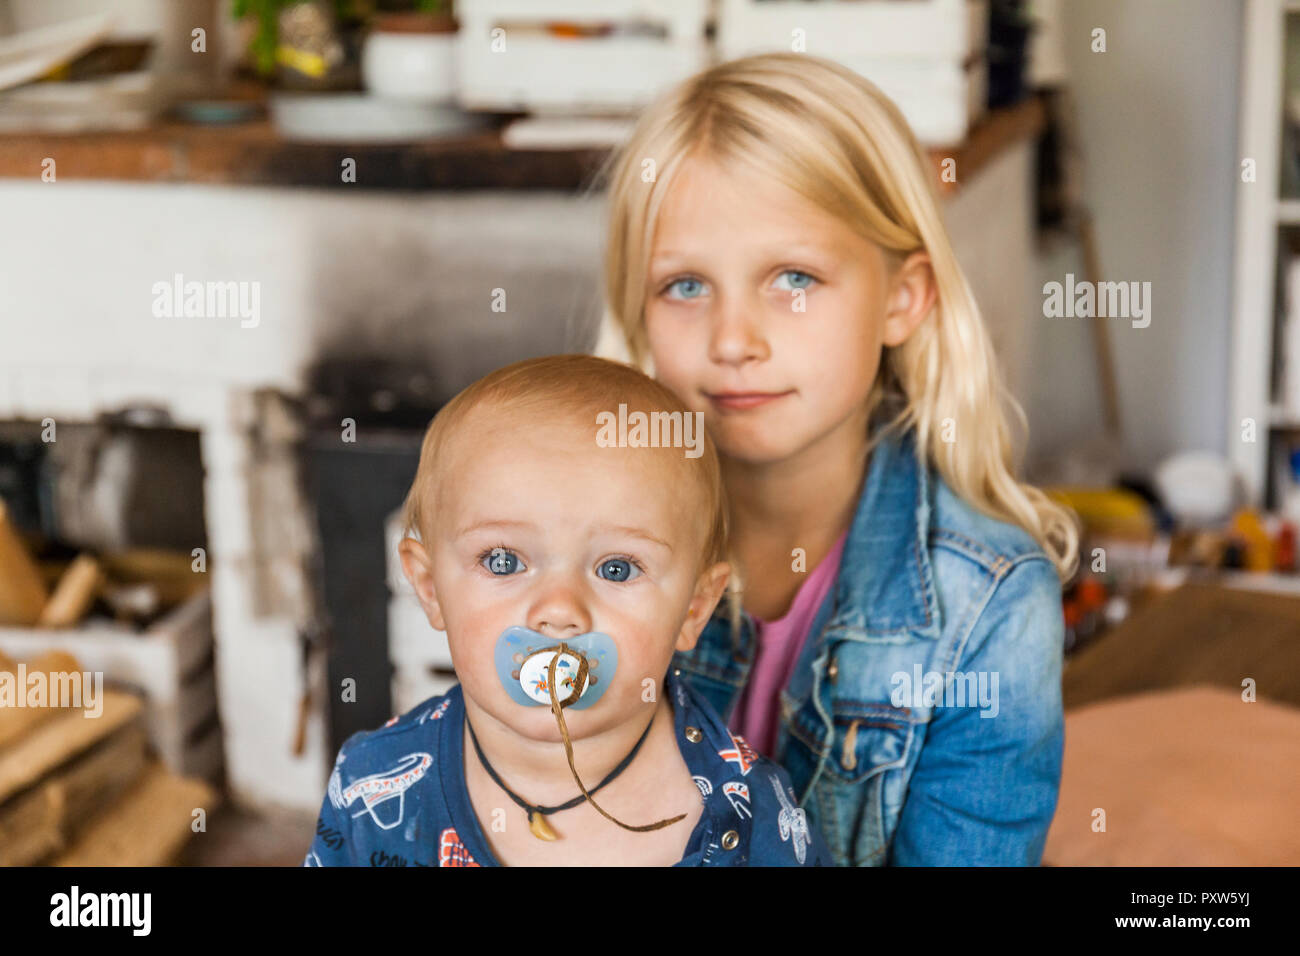 Portrait of girl with baby boy brother at home Stock Photo